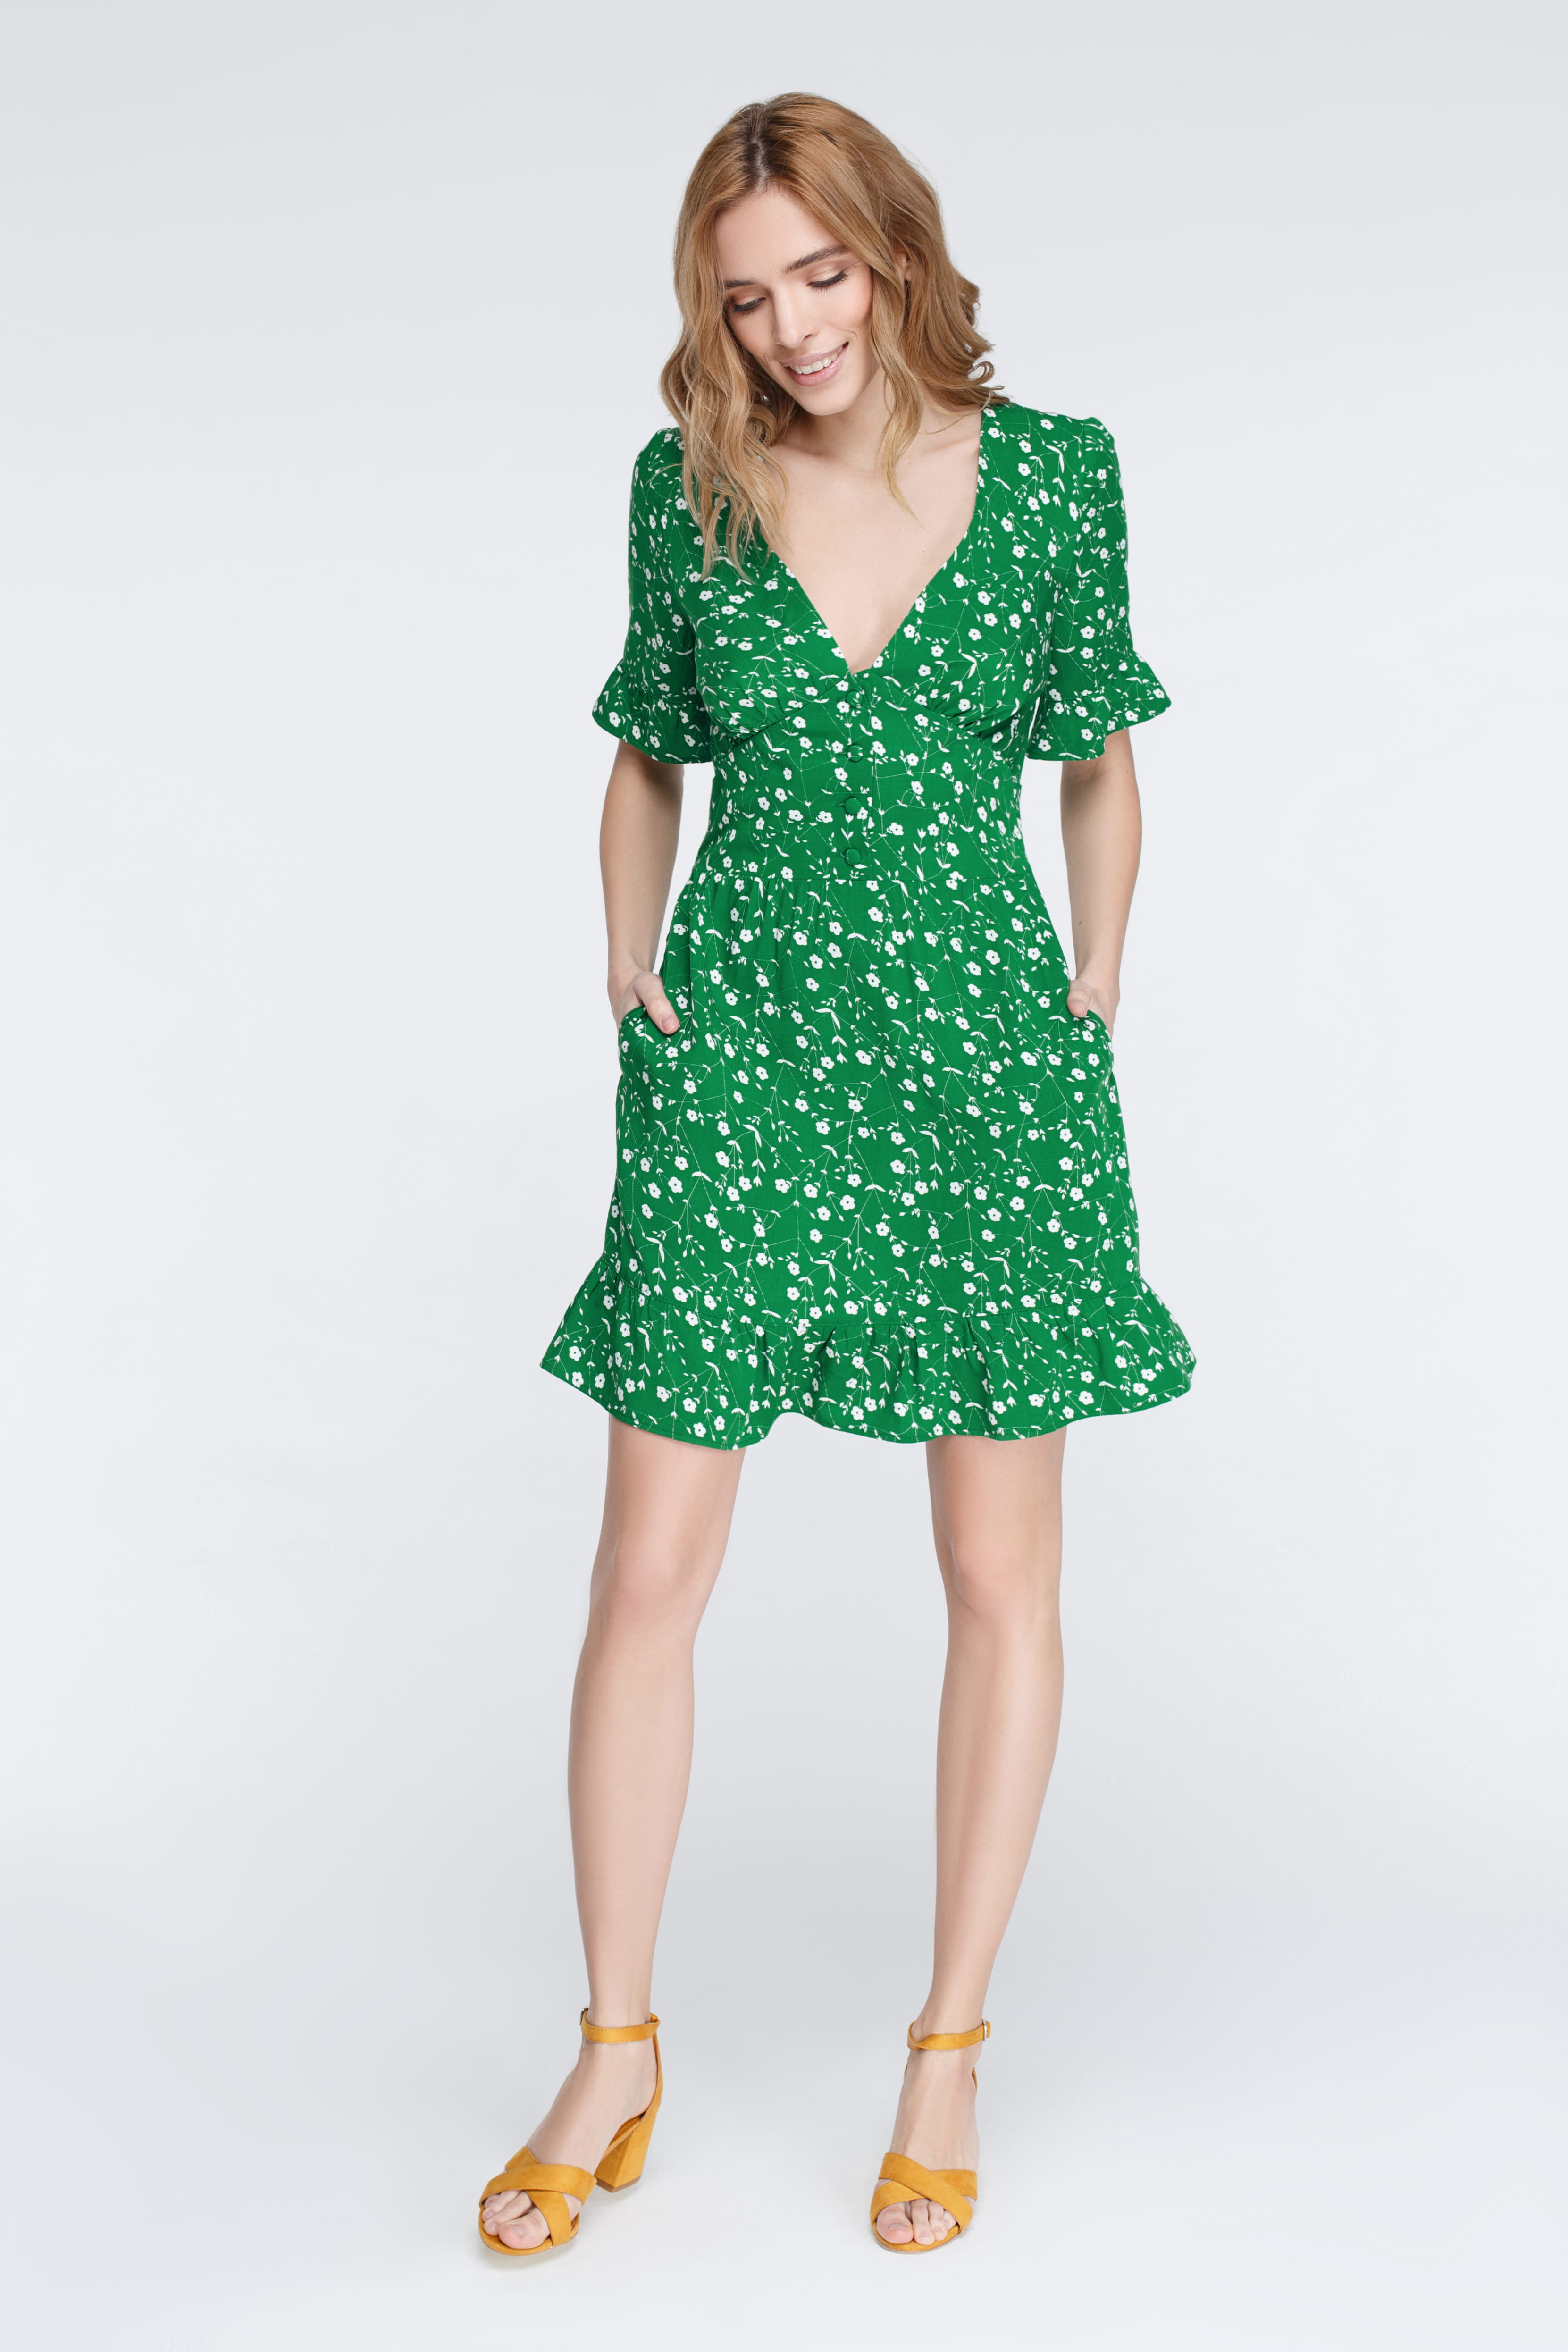 Green mini dress in floral print with frill, photo 1